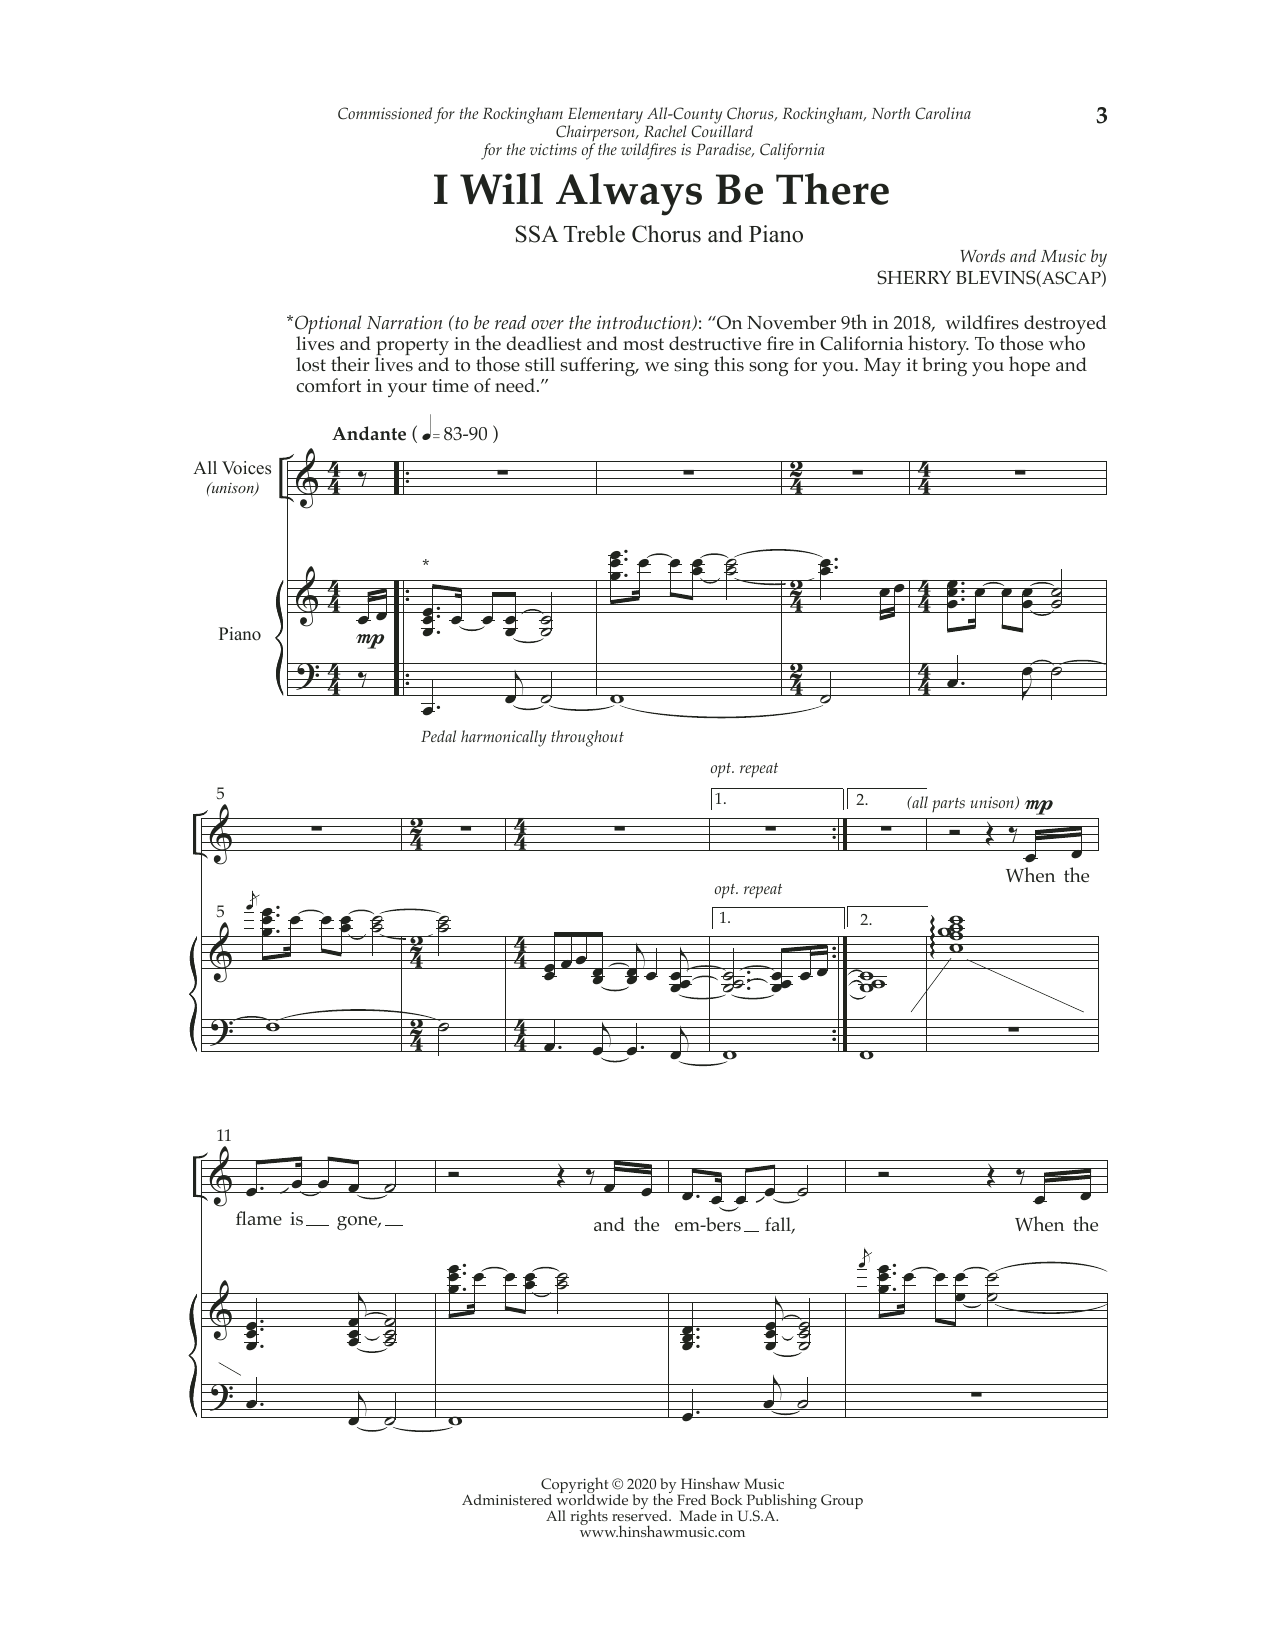 Download Sherry Blevins I Will Always Be There Sheet Music